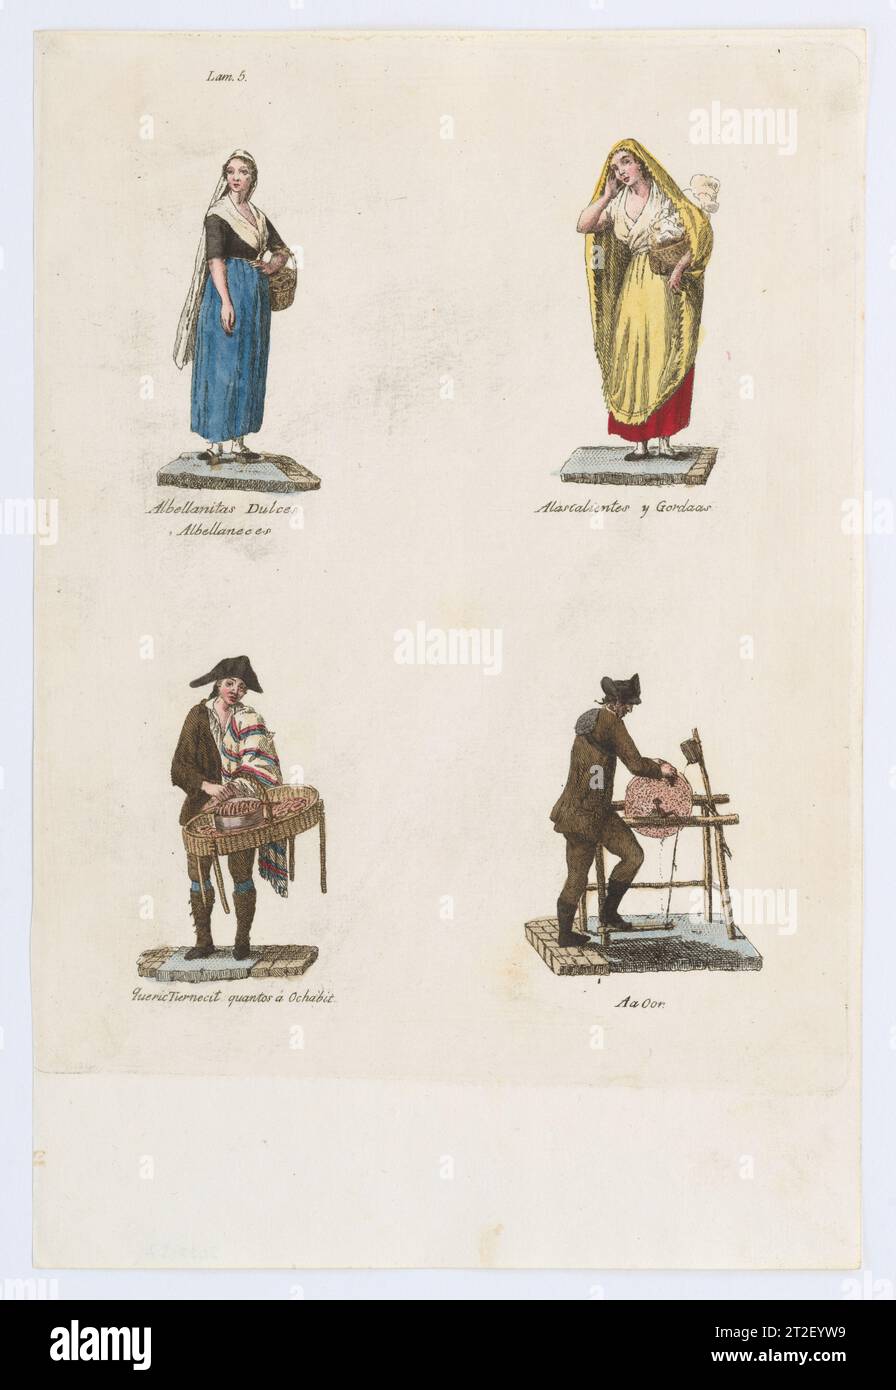 Plate 5: four street vendors from Madrid selling sweet albellanitas dulces, alacalienties, tender cuts and a knife grinder, from 'Los Gritos de Madrid' (The Cries of Madrid) Miguel Gamborino Spanish Publisher Imprenta Real, Madrid Spanish 1809–17 See comment for 2022.53. View more. Plate 5: four street vendors from Madrid selling sweet albellanitas dulces, alacalienties, tender cuts and a knife grinder, from 'Los Gritos de Madrid' (The Cries of Madrid). Miguel Gamborino (Spanish, Valencia 1760–1828 Madrid). 1809–17. Engraving with hand coloring. Imprenta Real, Madrid. Prints Stock Photo